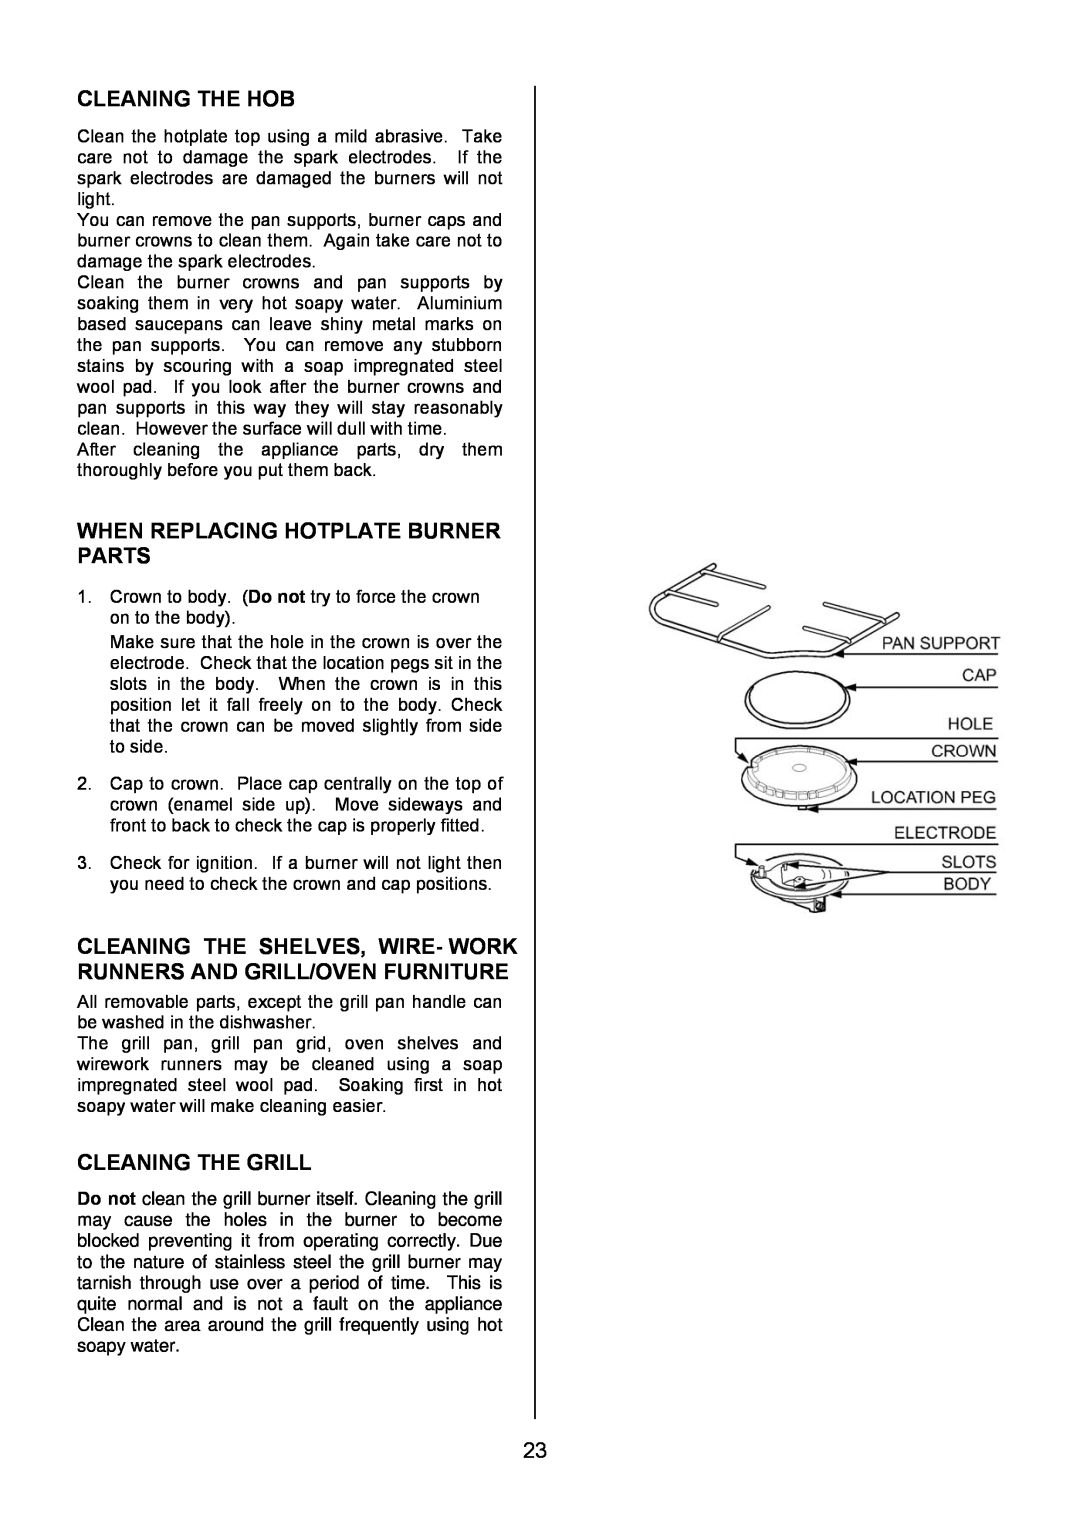 Electrolux EIKG6046, EIKG6047 user manual Cleaning The Hob, When Replacing Hotplate Burner Parts, Cleaning The Grill 